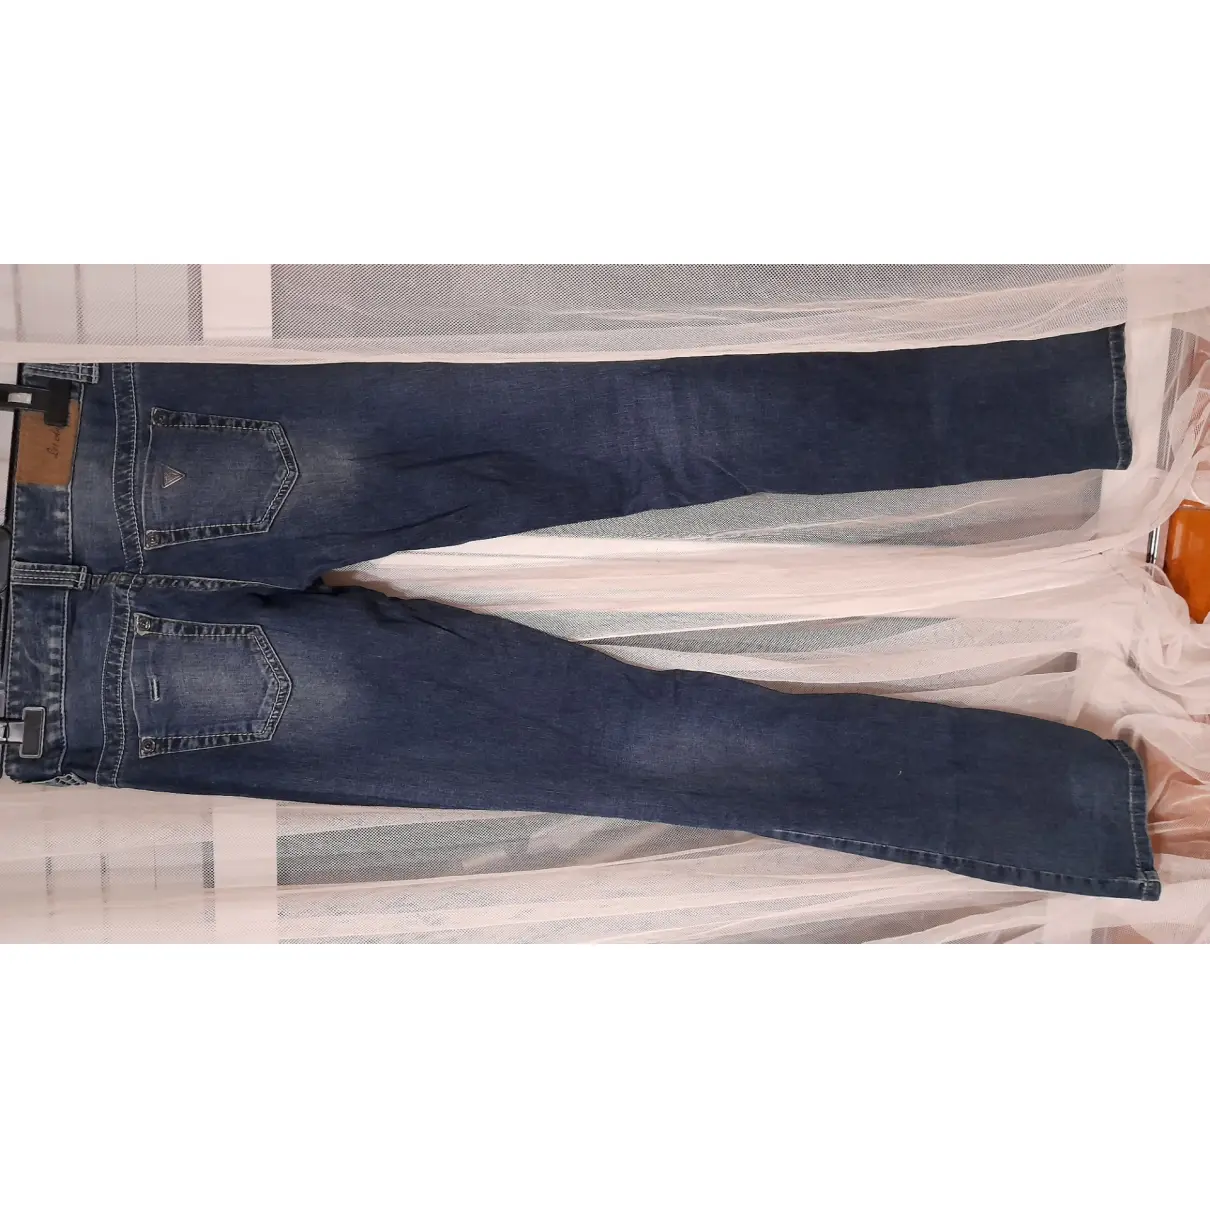 Buy GUESS Straight jeans online